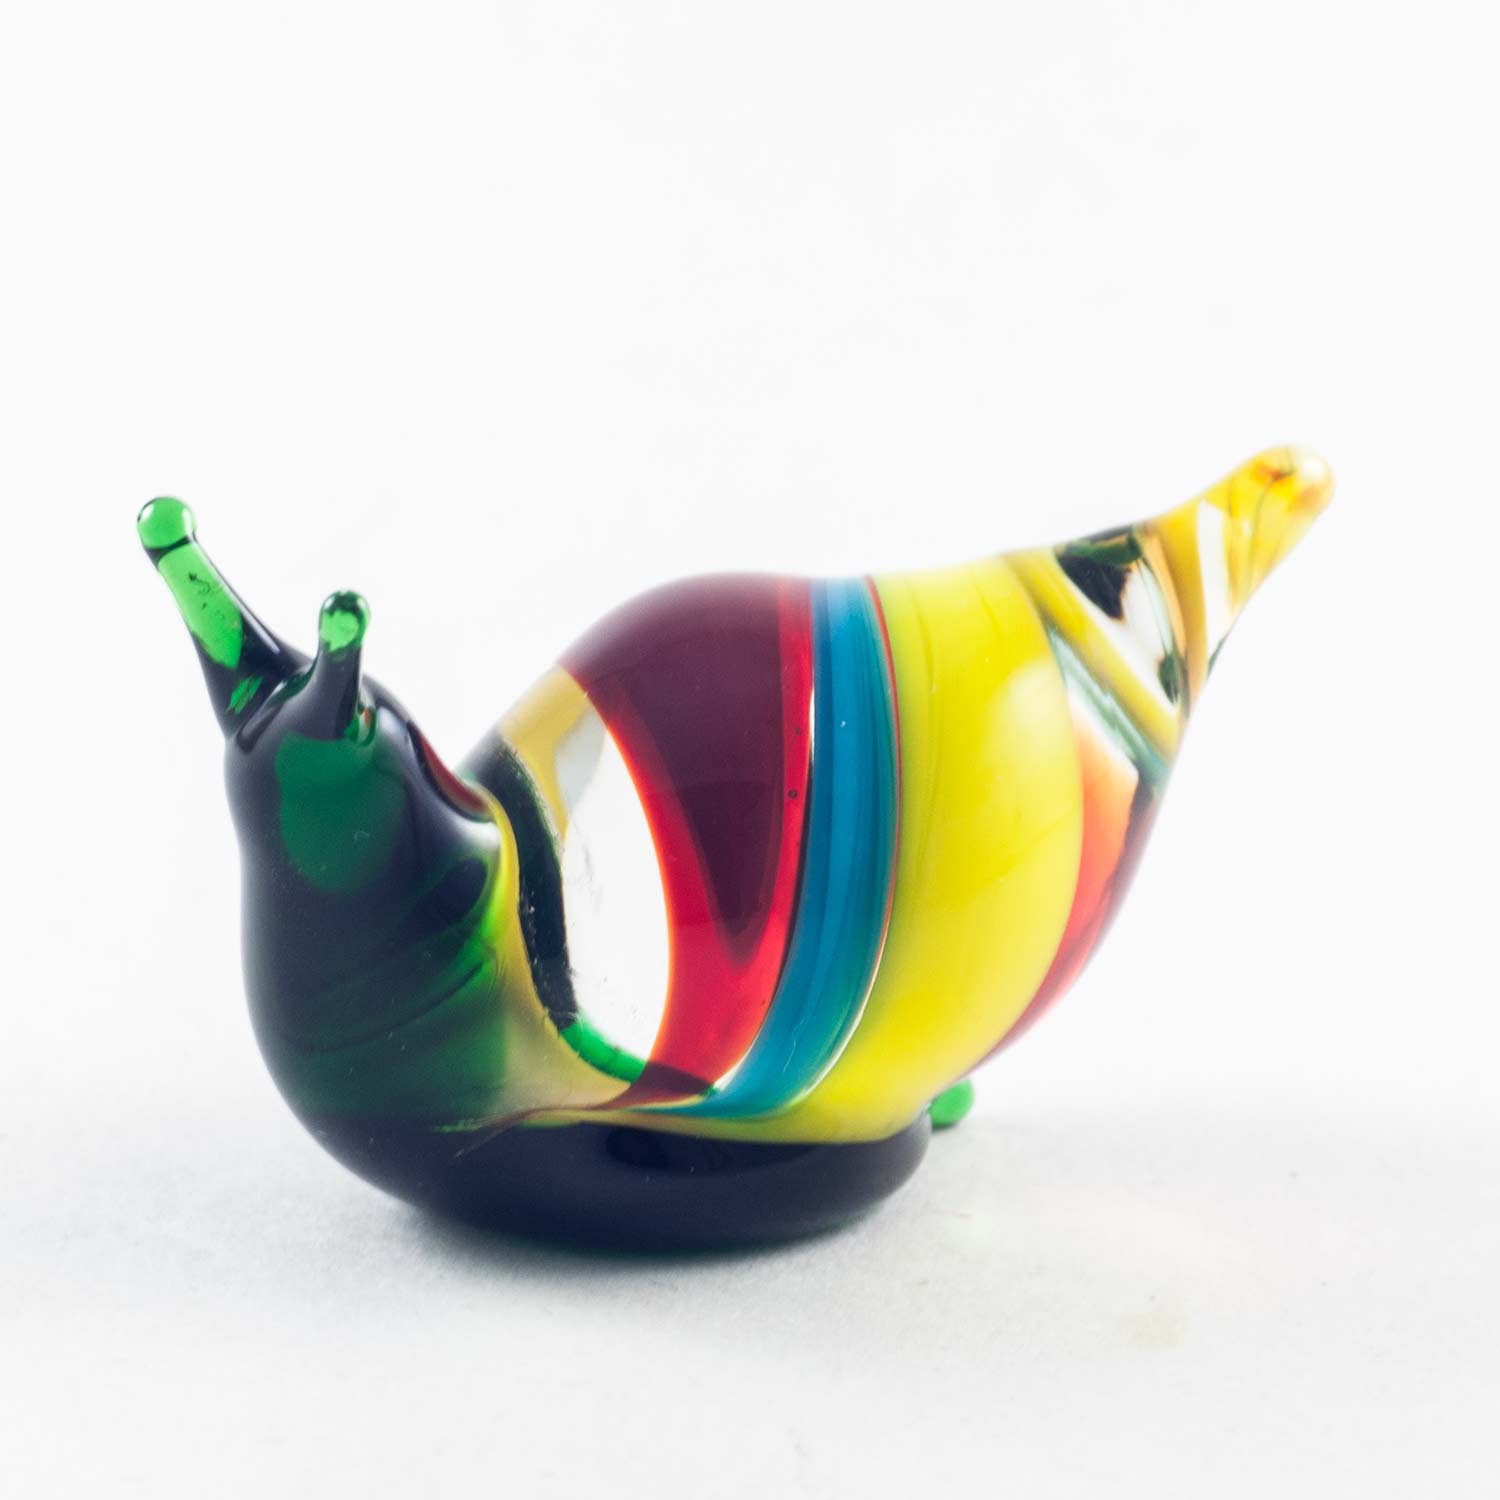 Snail Glass Figurine in Glass Figurines Insects category